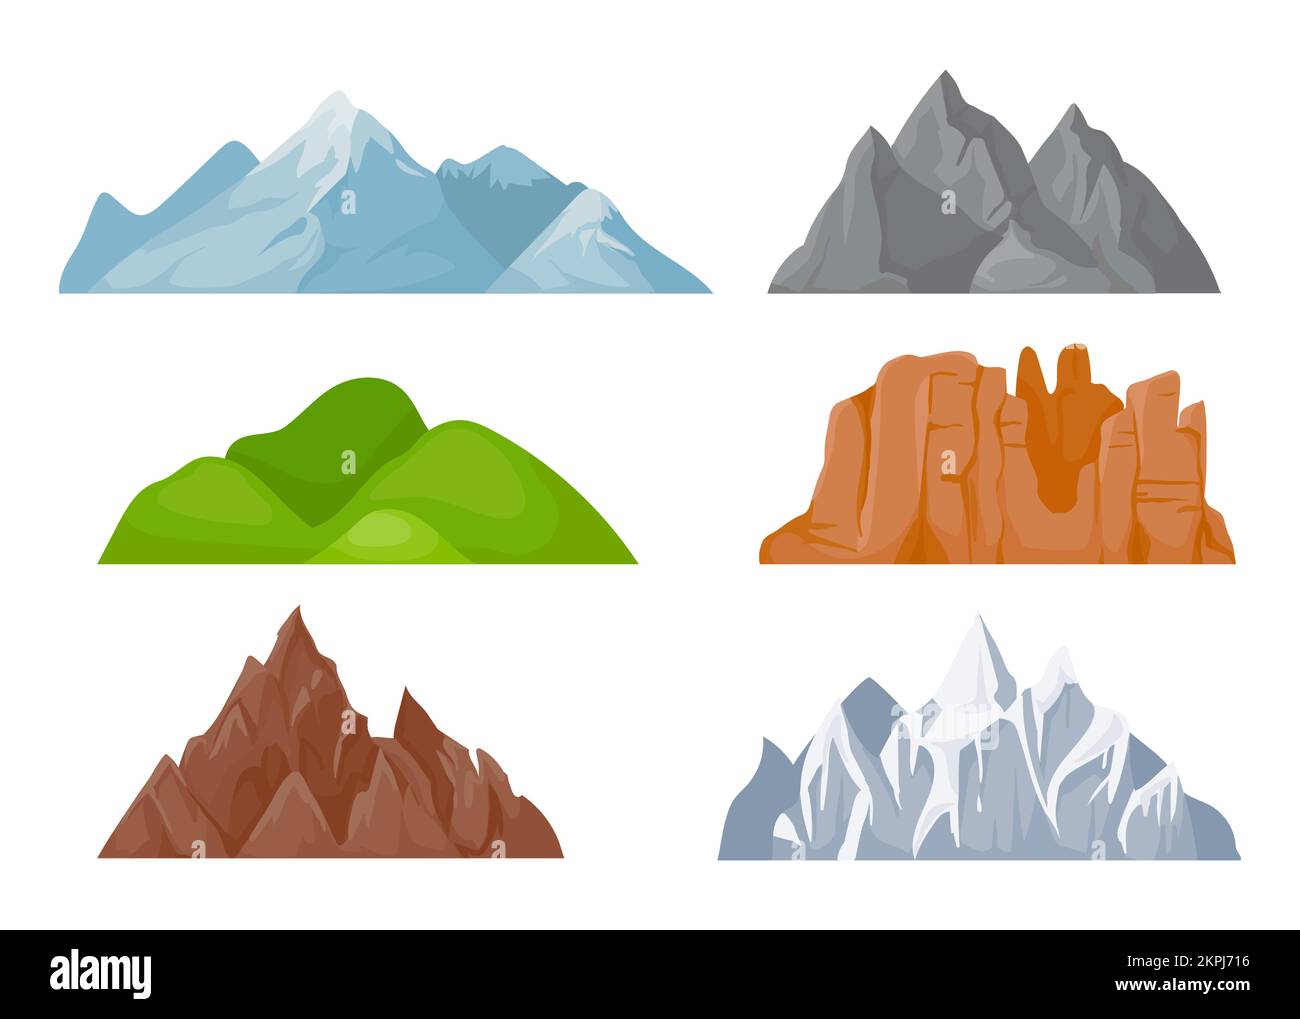 Cartoon mountains ridges. Nature landscape elements with snowy tops, green hills, stone cliffs. Outdoor wild areas for hiking or extreme sport in diff Stock Vector